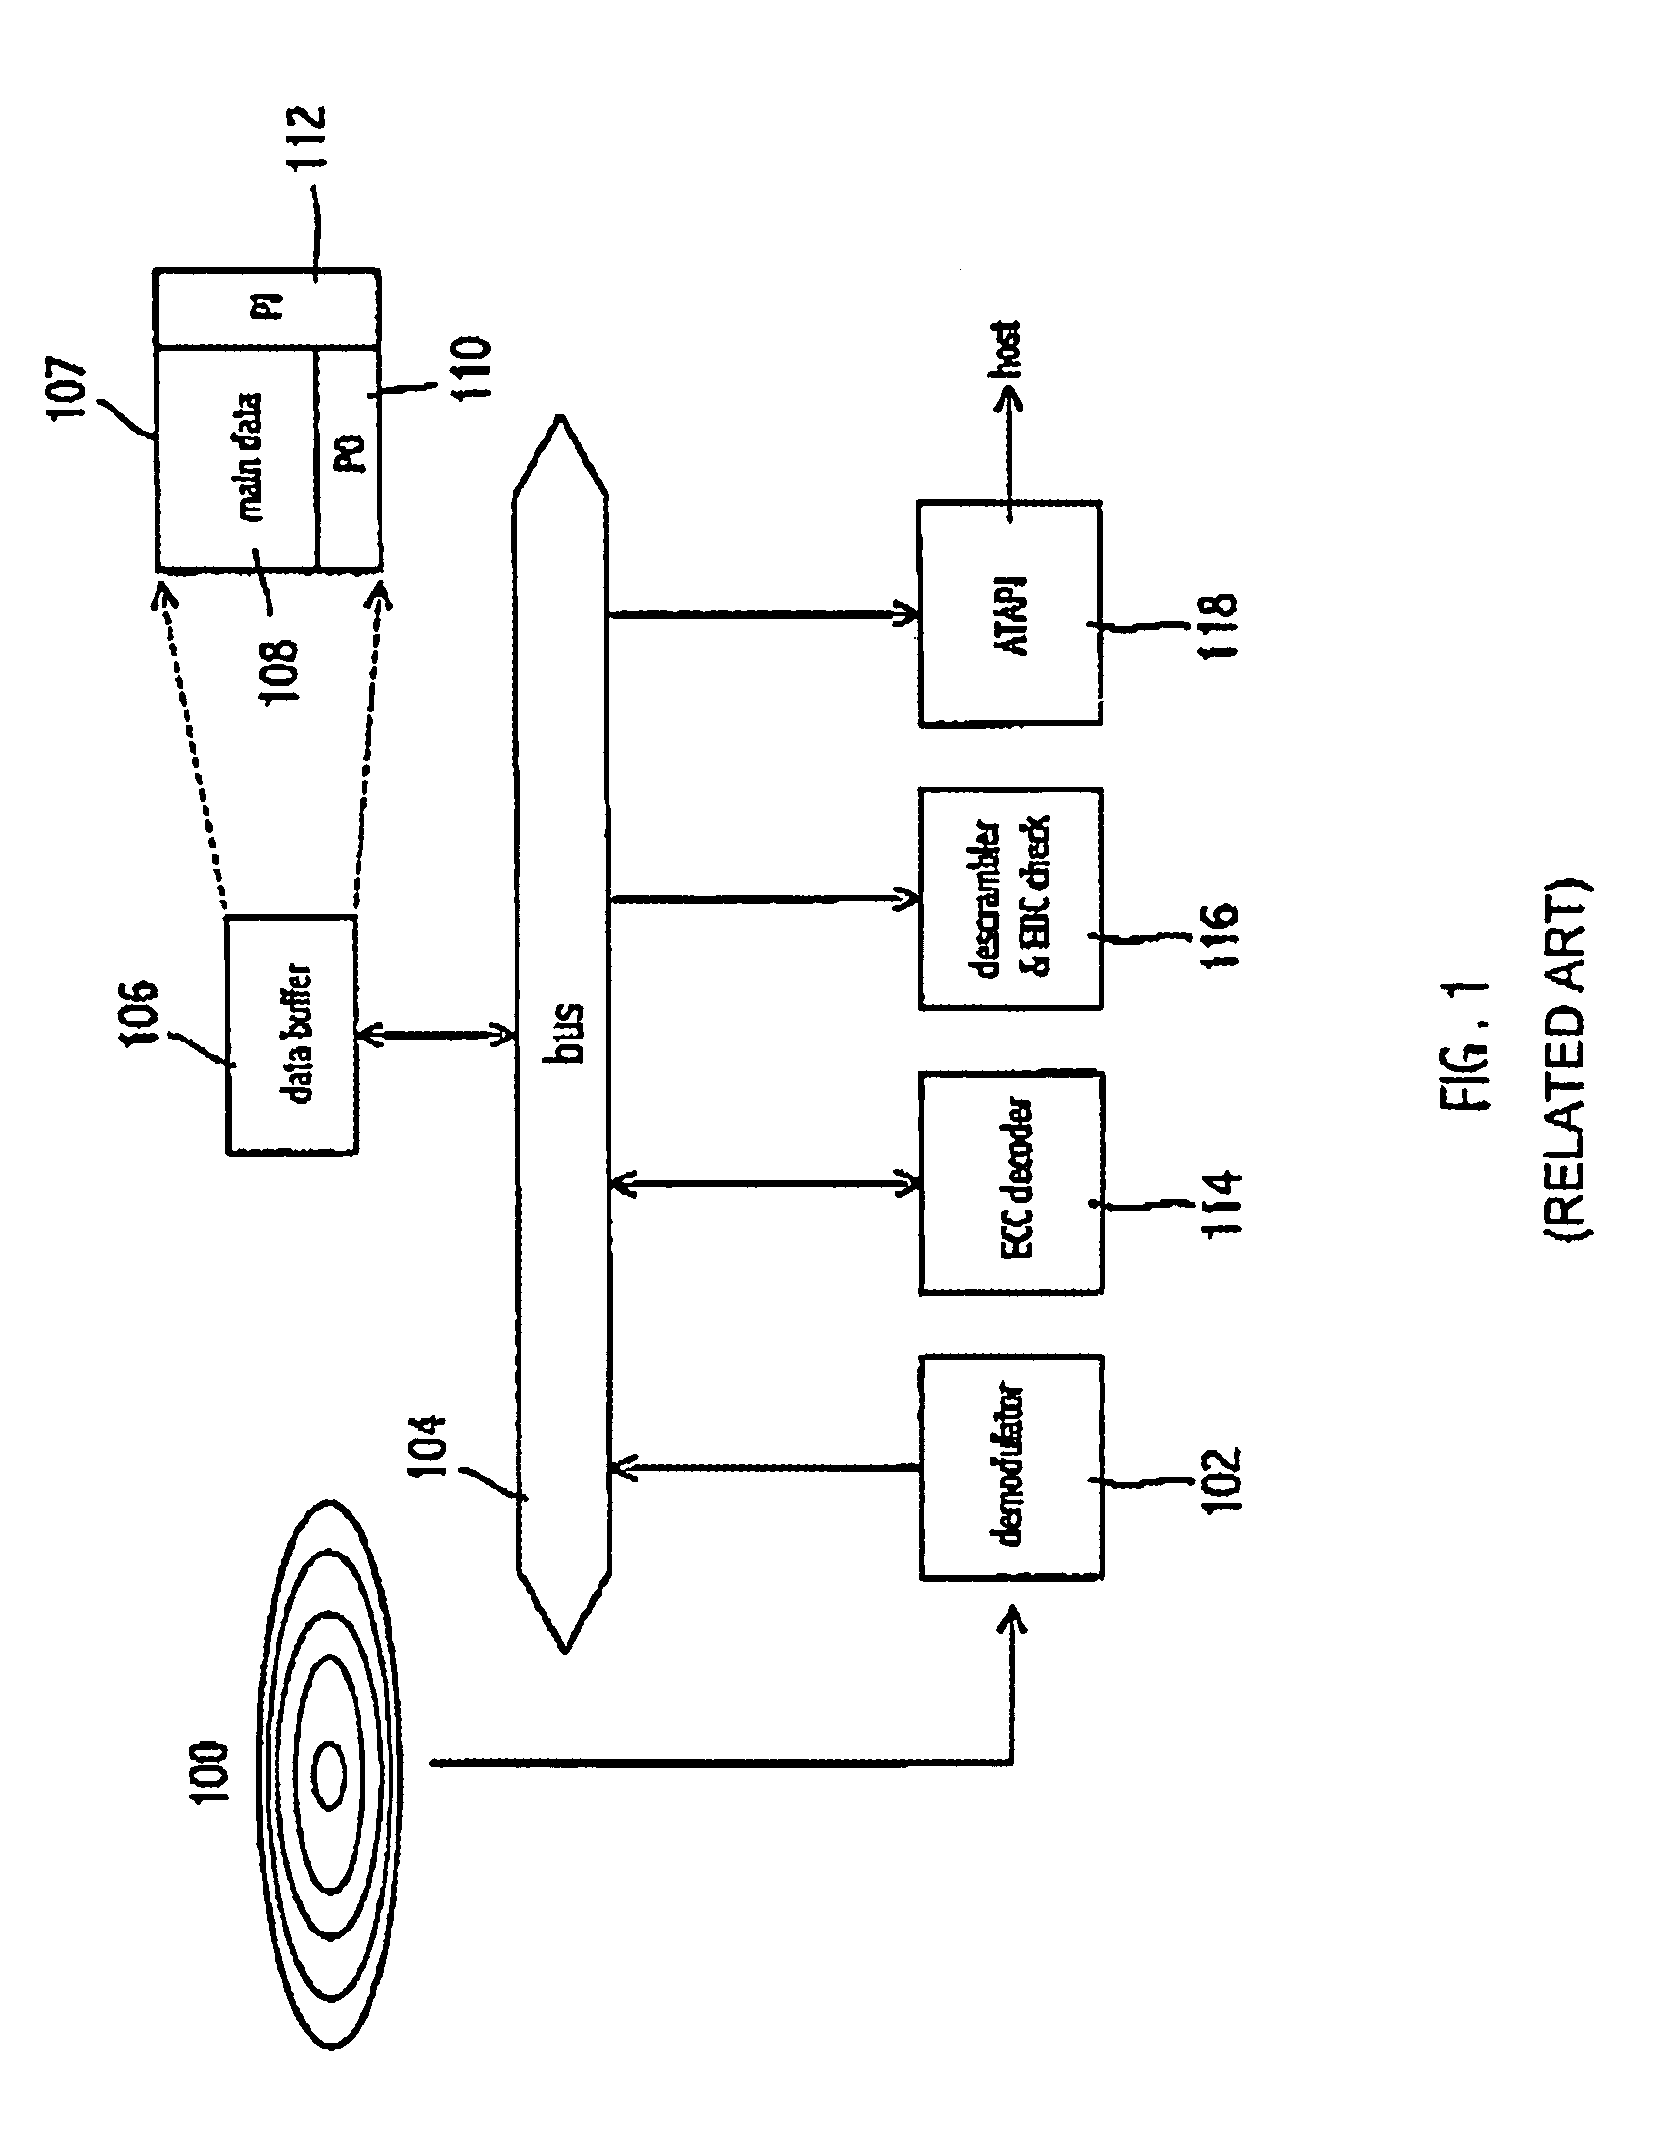 Decoding system and method in an optical disk storage device